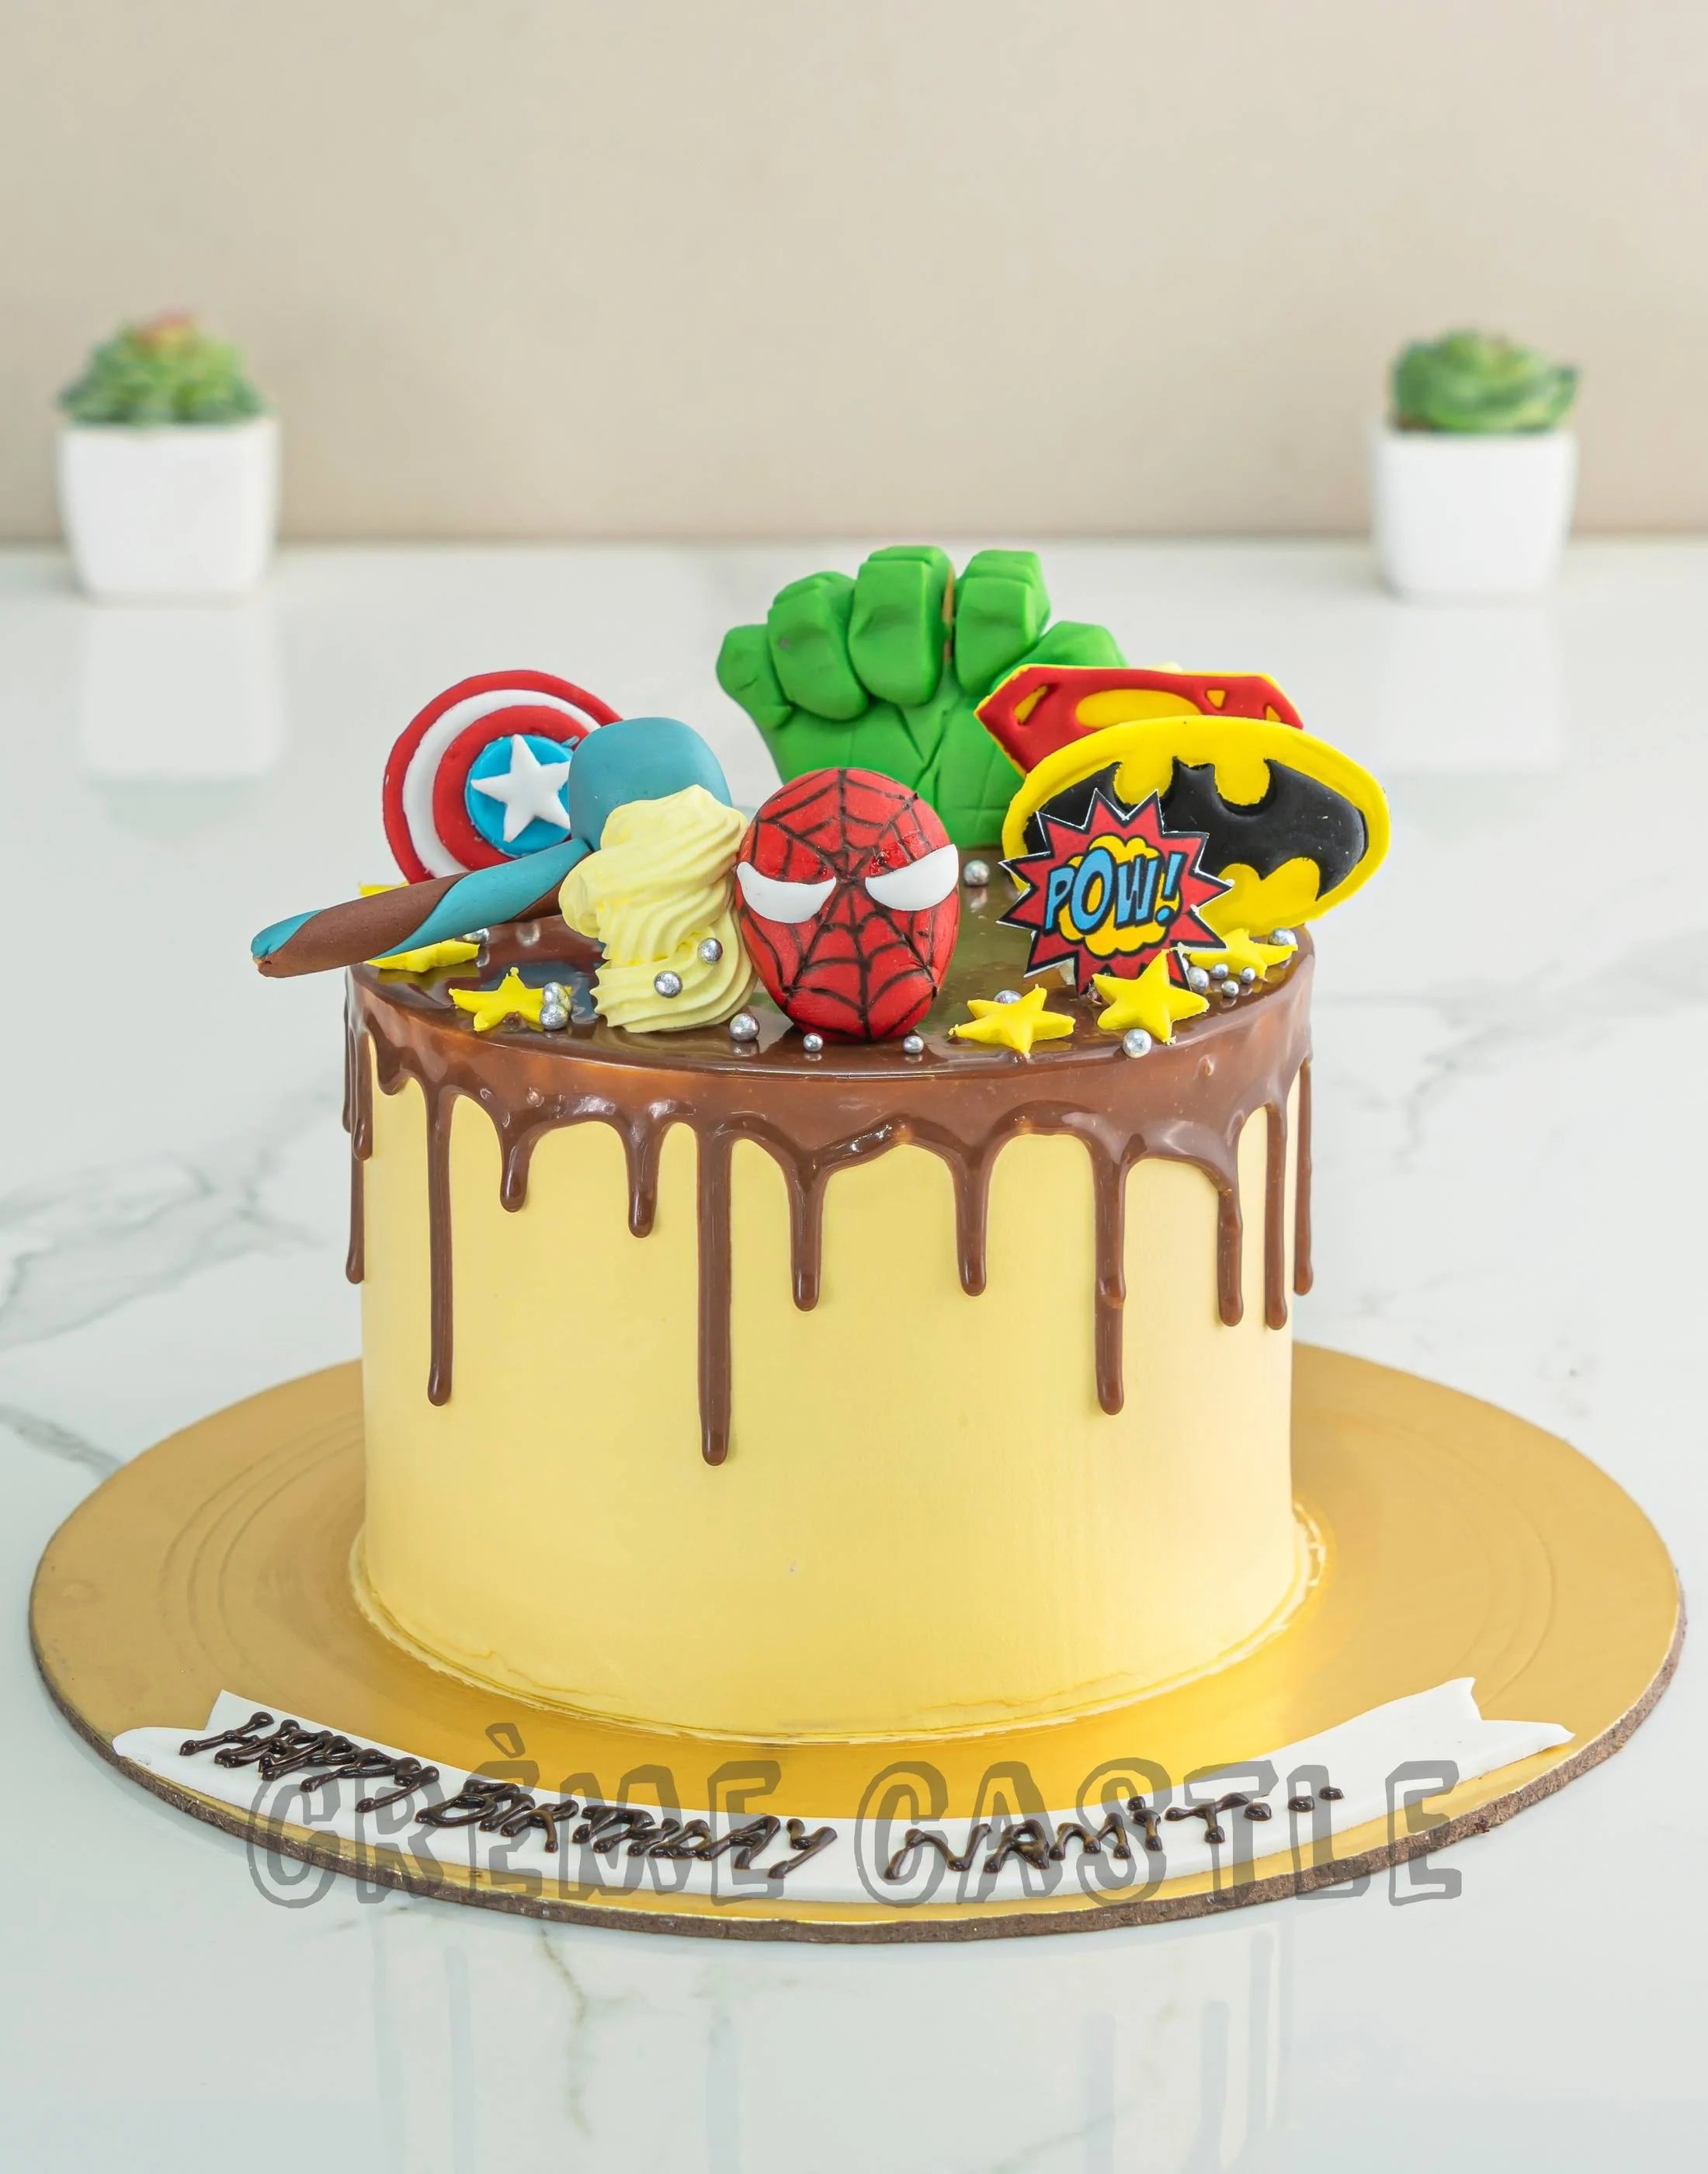 15 Spiderman Cake Ideas That Are a Must For a Superhero Birthday |  Spiderman birthday party, Spiderman birthday cake, Spiderman birthday party  decorations